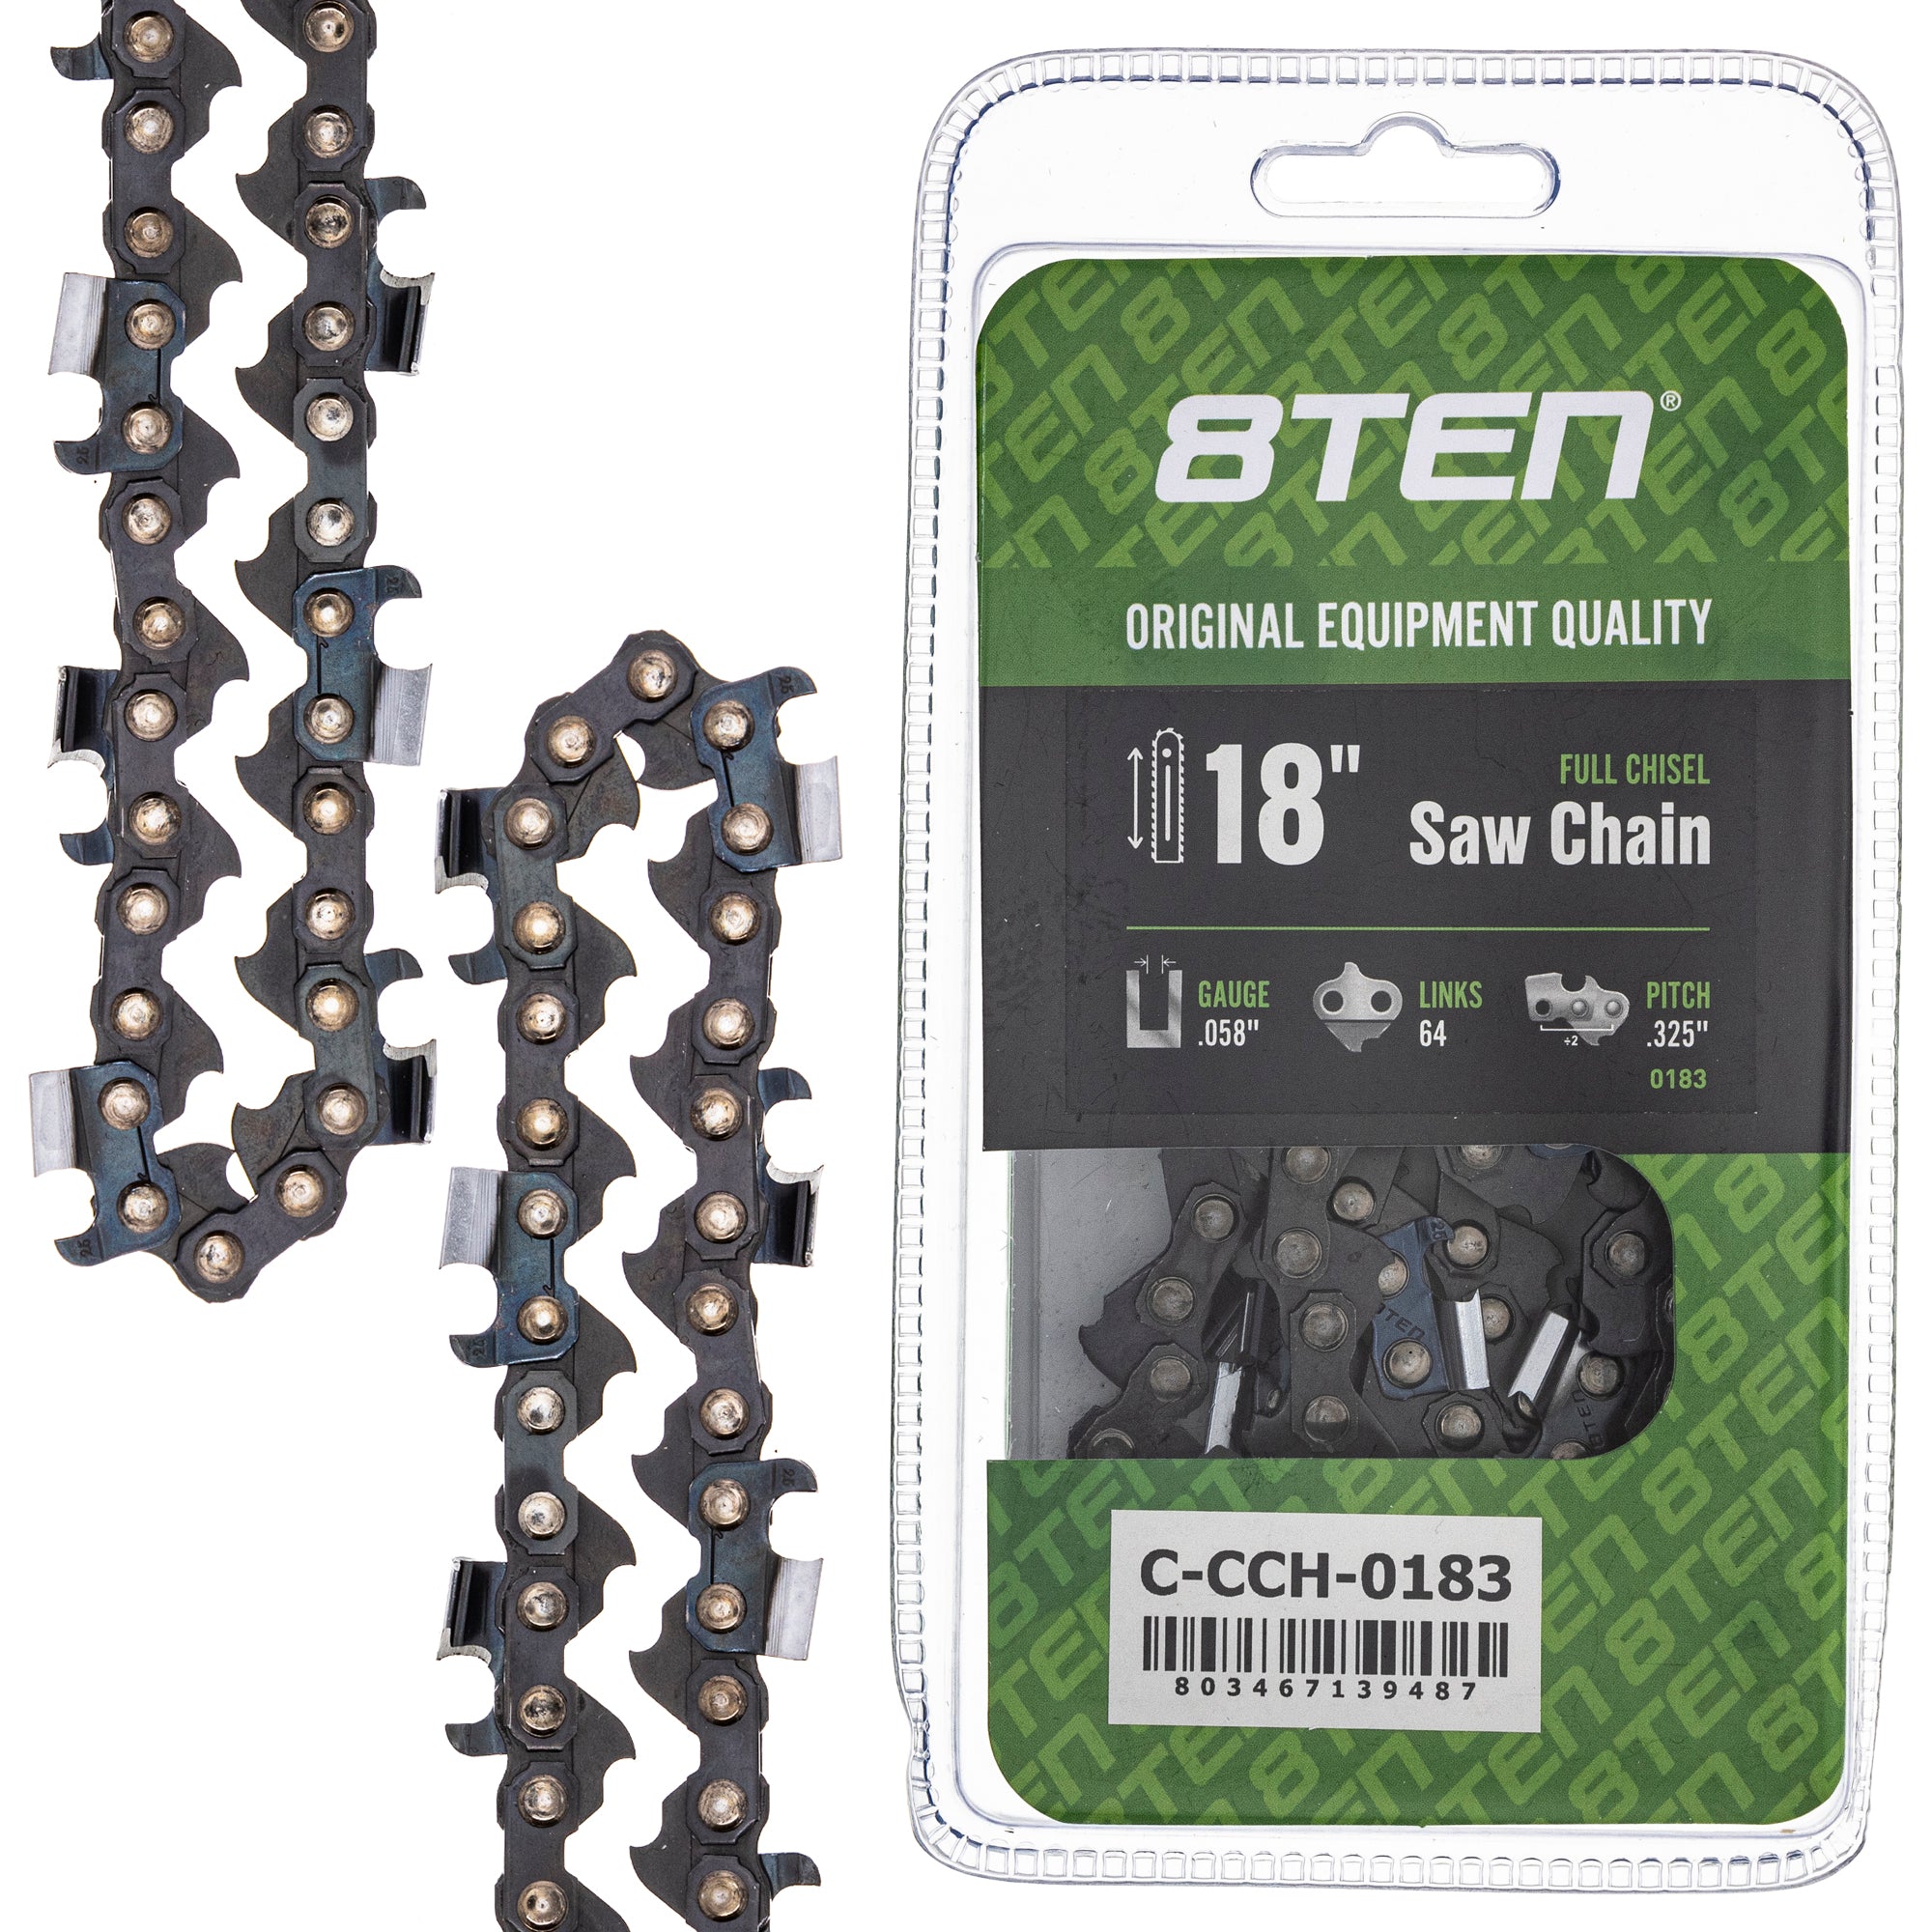 Chainsaw Chain 18 Inch .058 .325 64DL for zOTHER Oregon PS EA6101P53G EA6100PREG 8TEN 810-CCC2305H